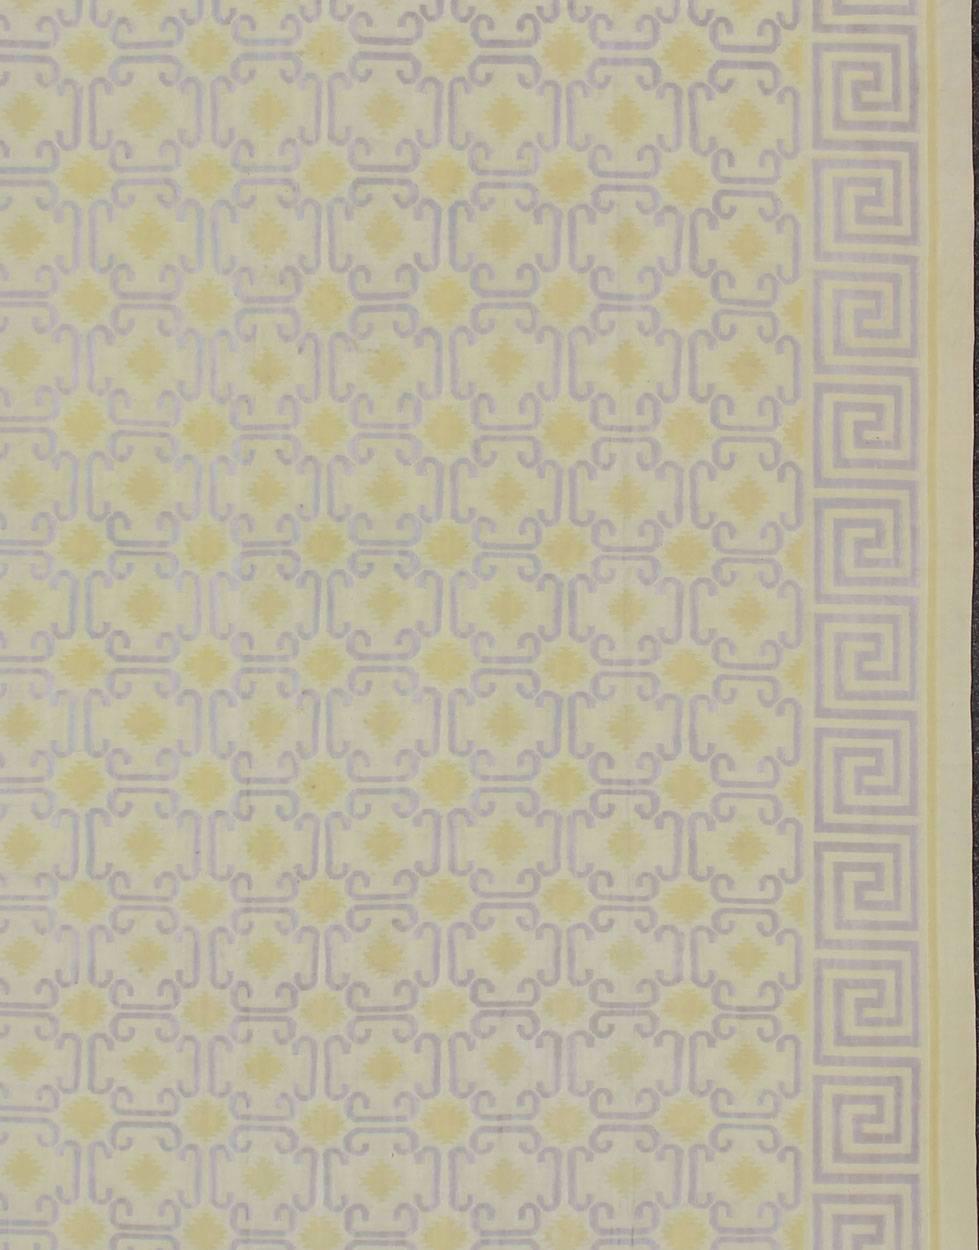 Woven during the mid-20th Century, this designer flat-woven Indian cotton dhurrie is adorned with east Turkestan/Khotan motifs and features an inventive low-contrast color palette. A Greek key border frames the entire background, while repeating